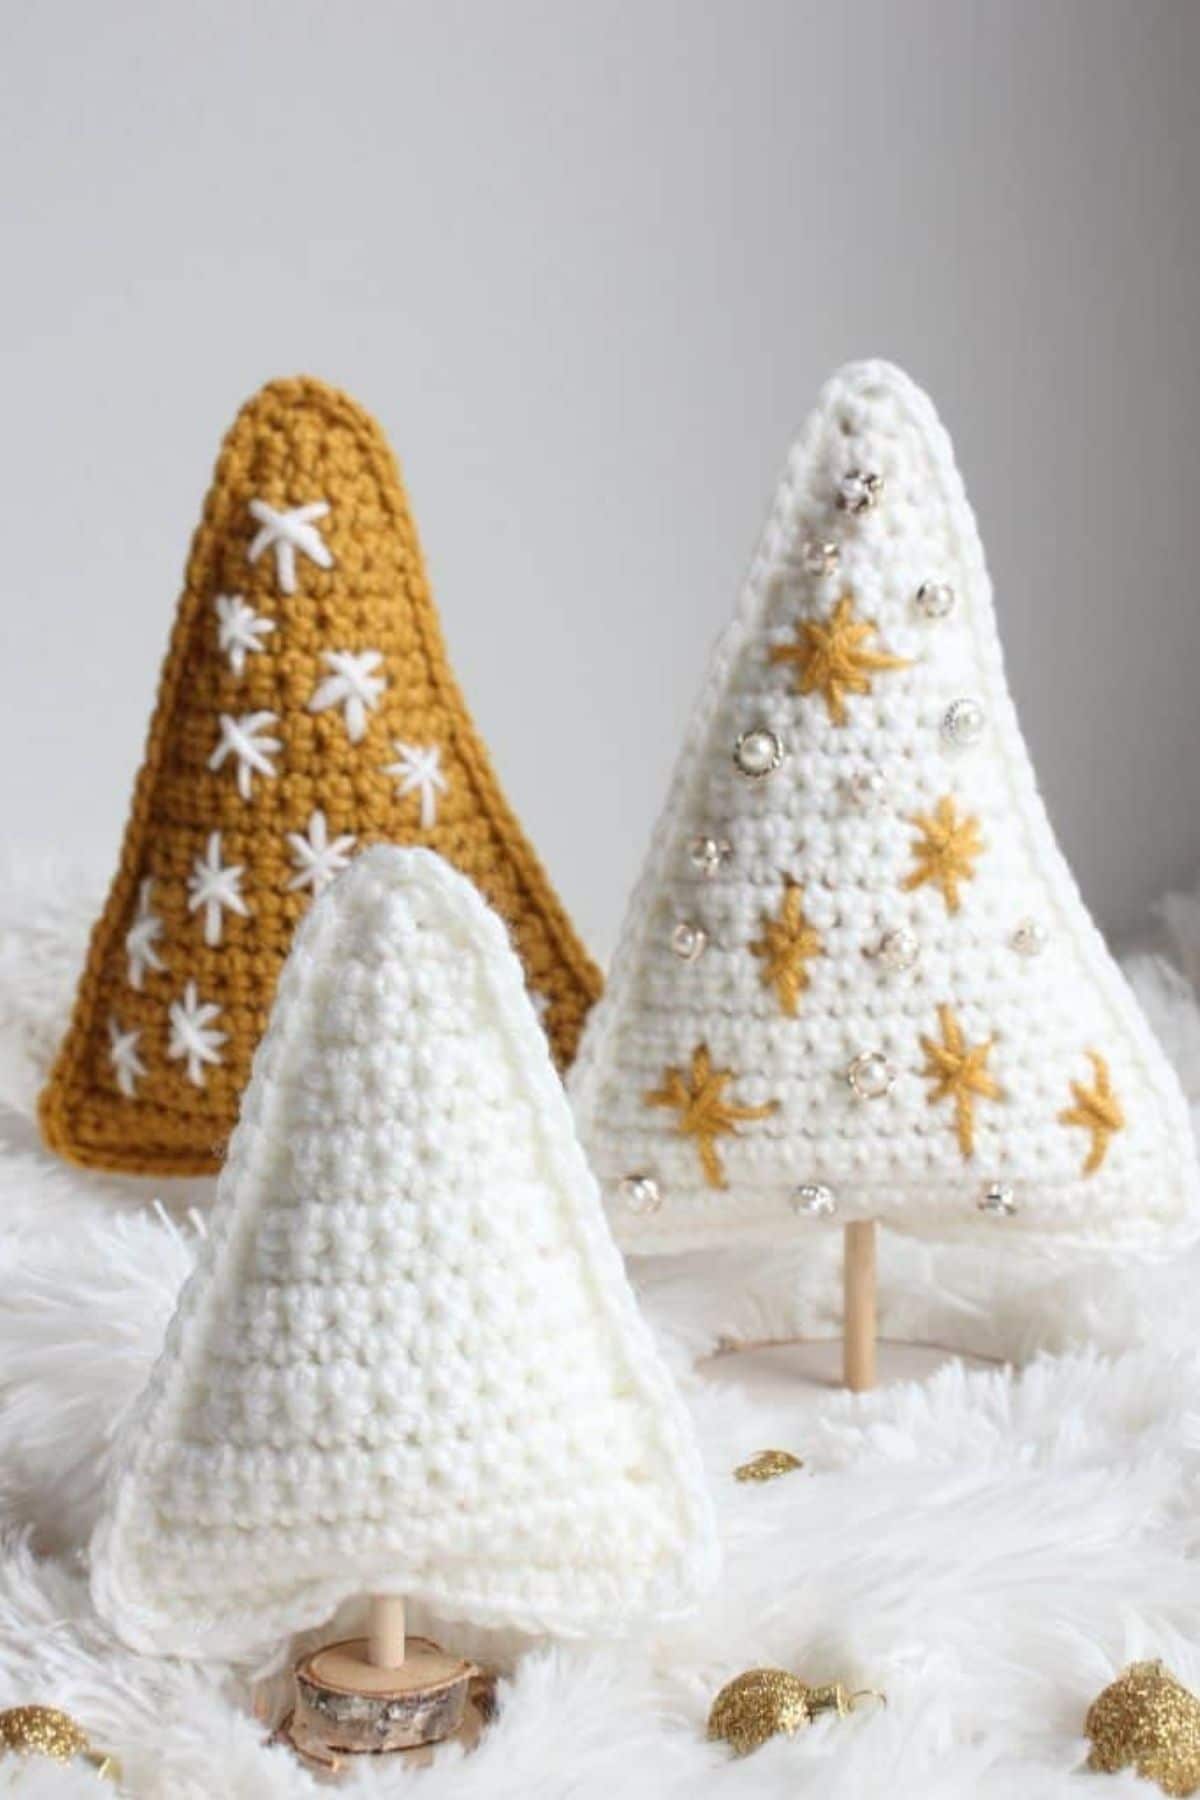 A white crochet Christmas tree on a wooden stand next to larger white and gold trees with stars stitched into them.